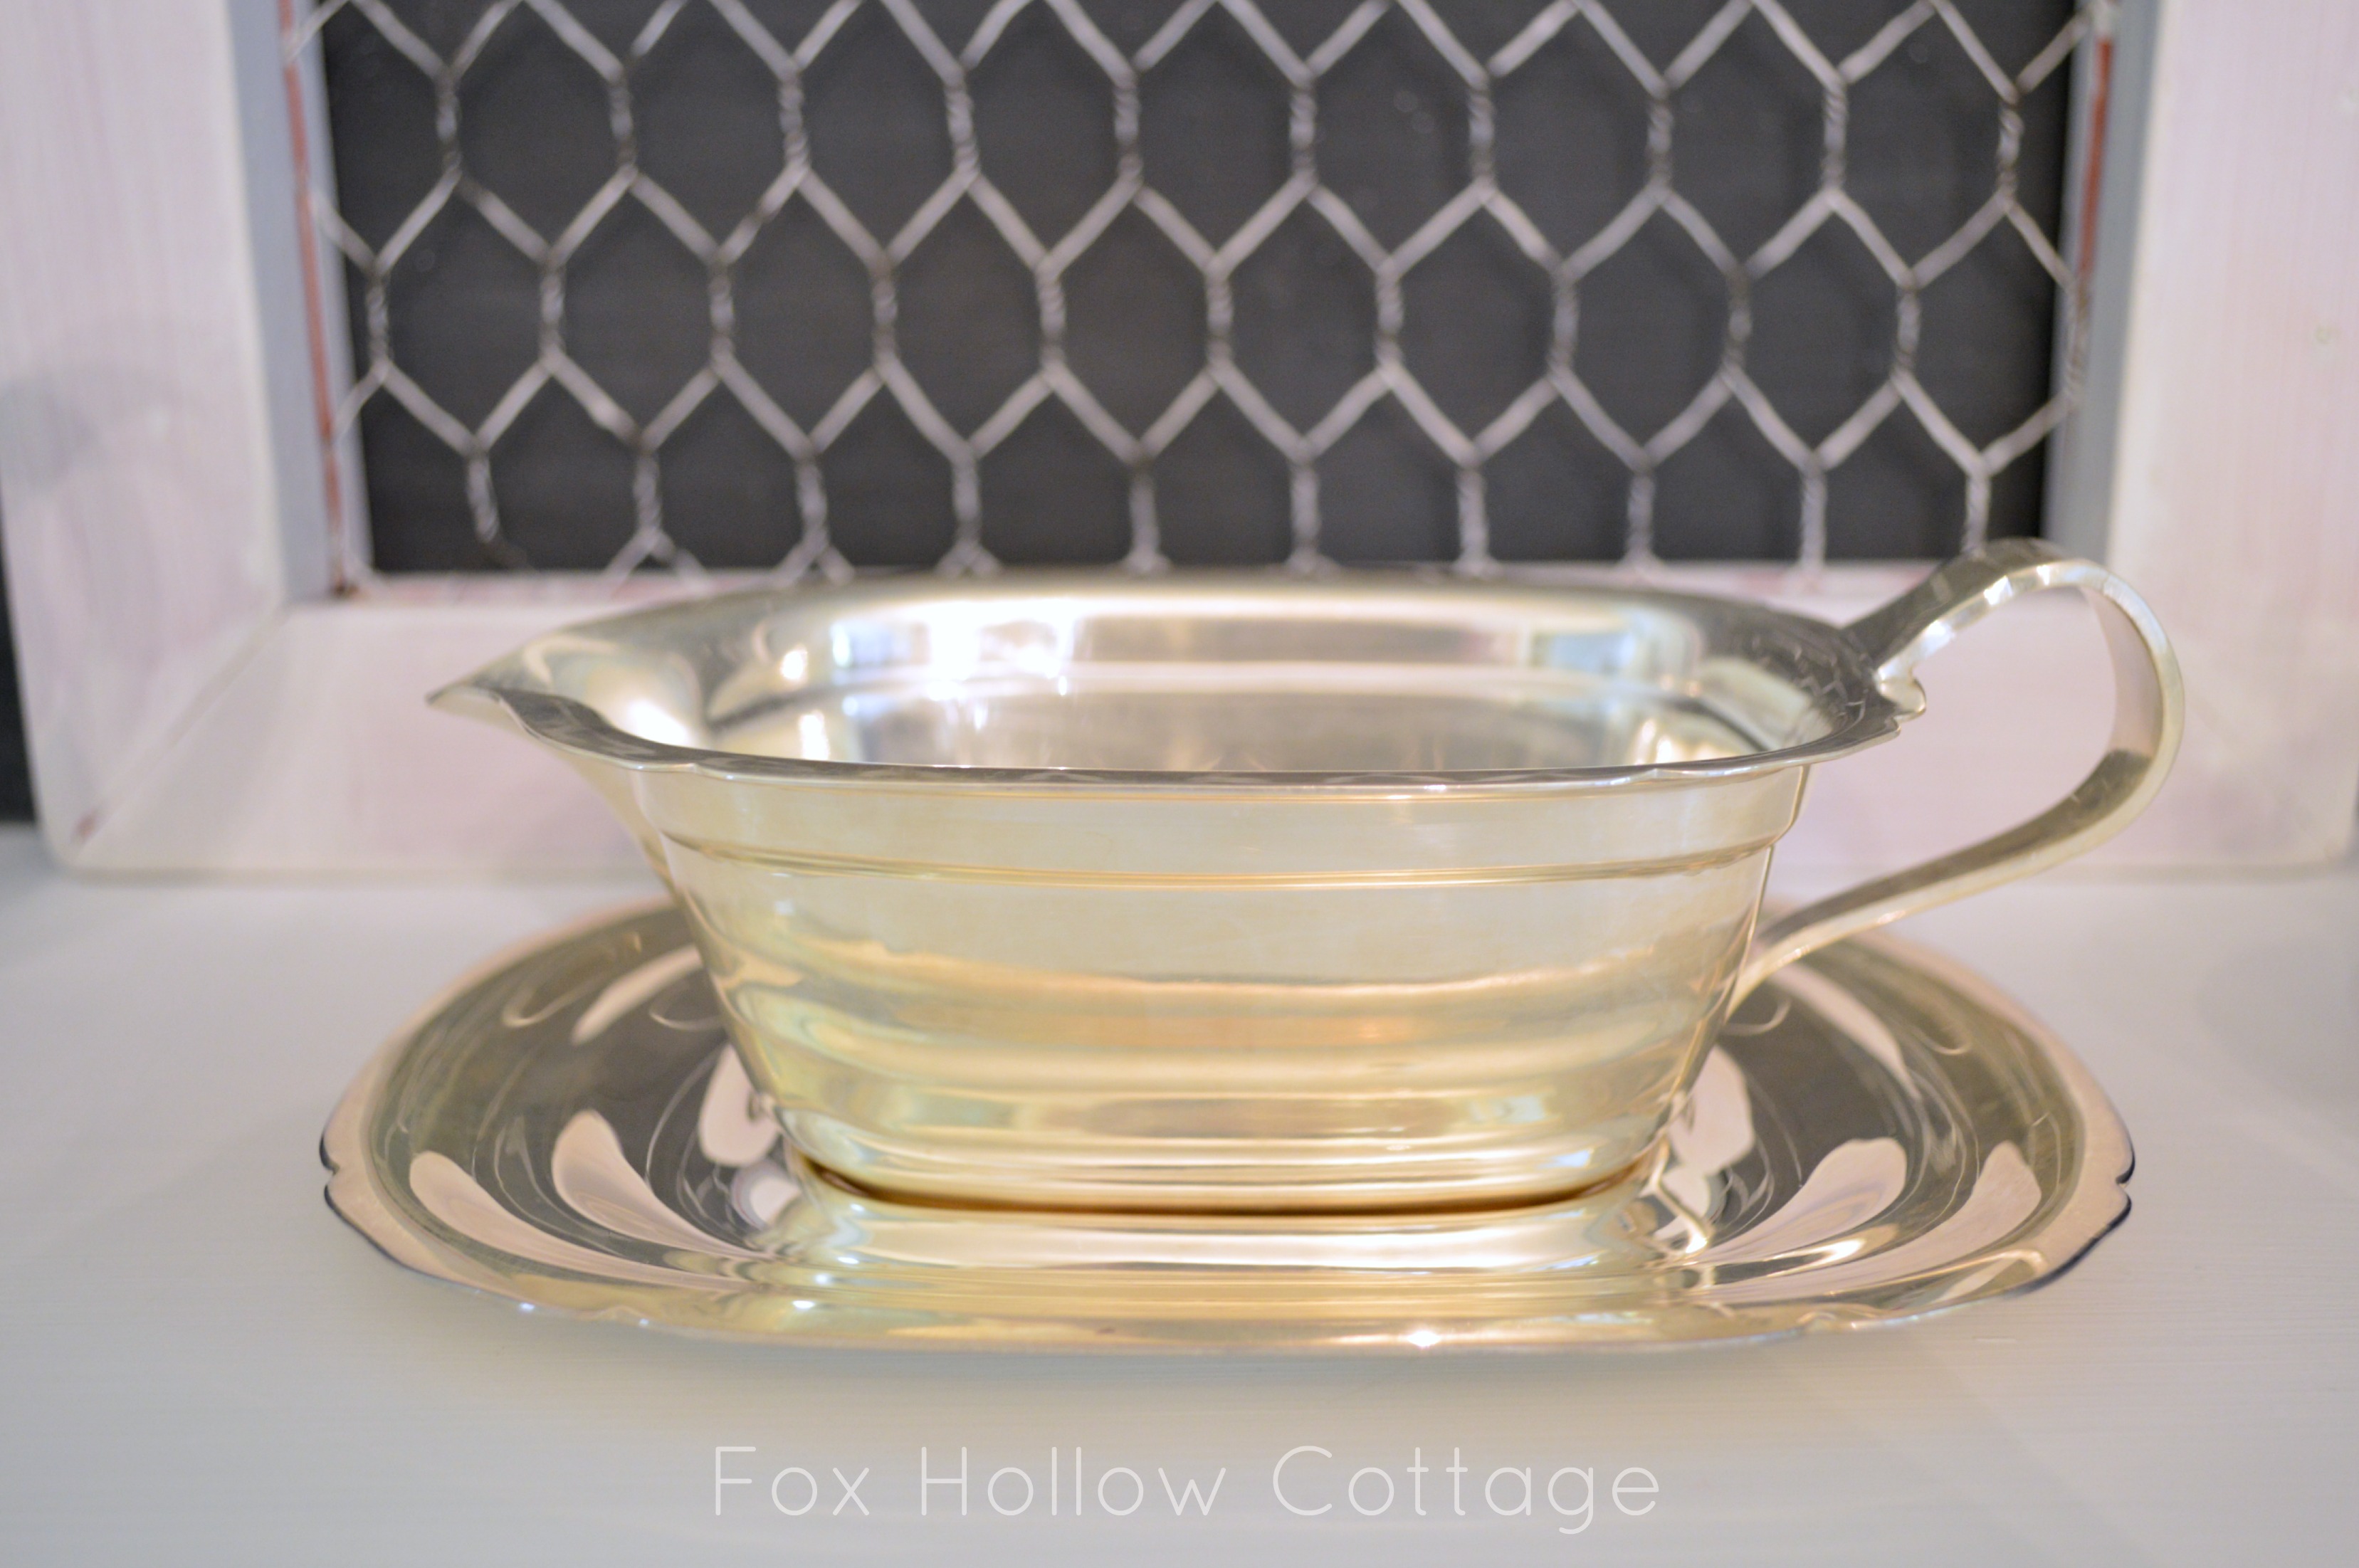 Sparkly Silver Quick and Easy! - Fox Hollow Cottage